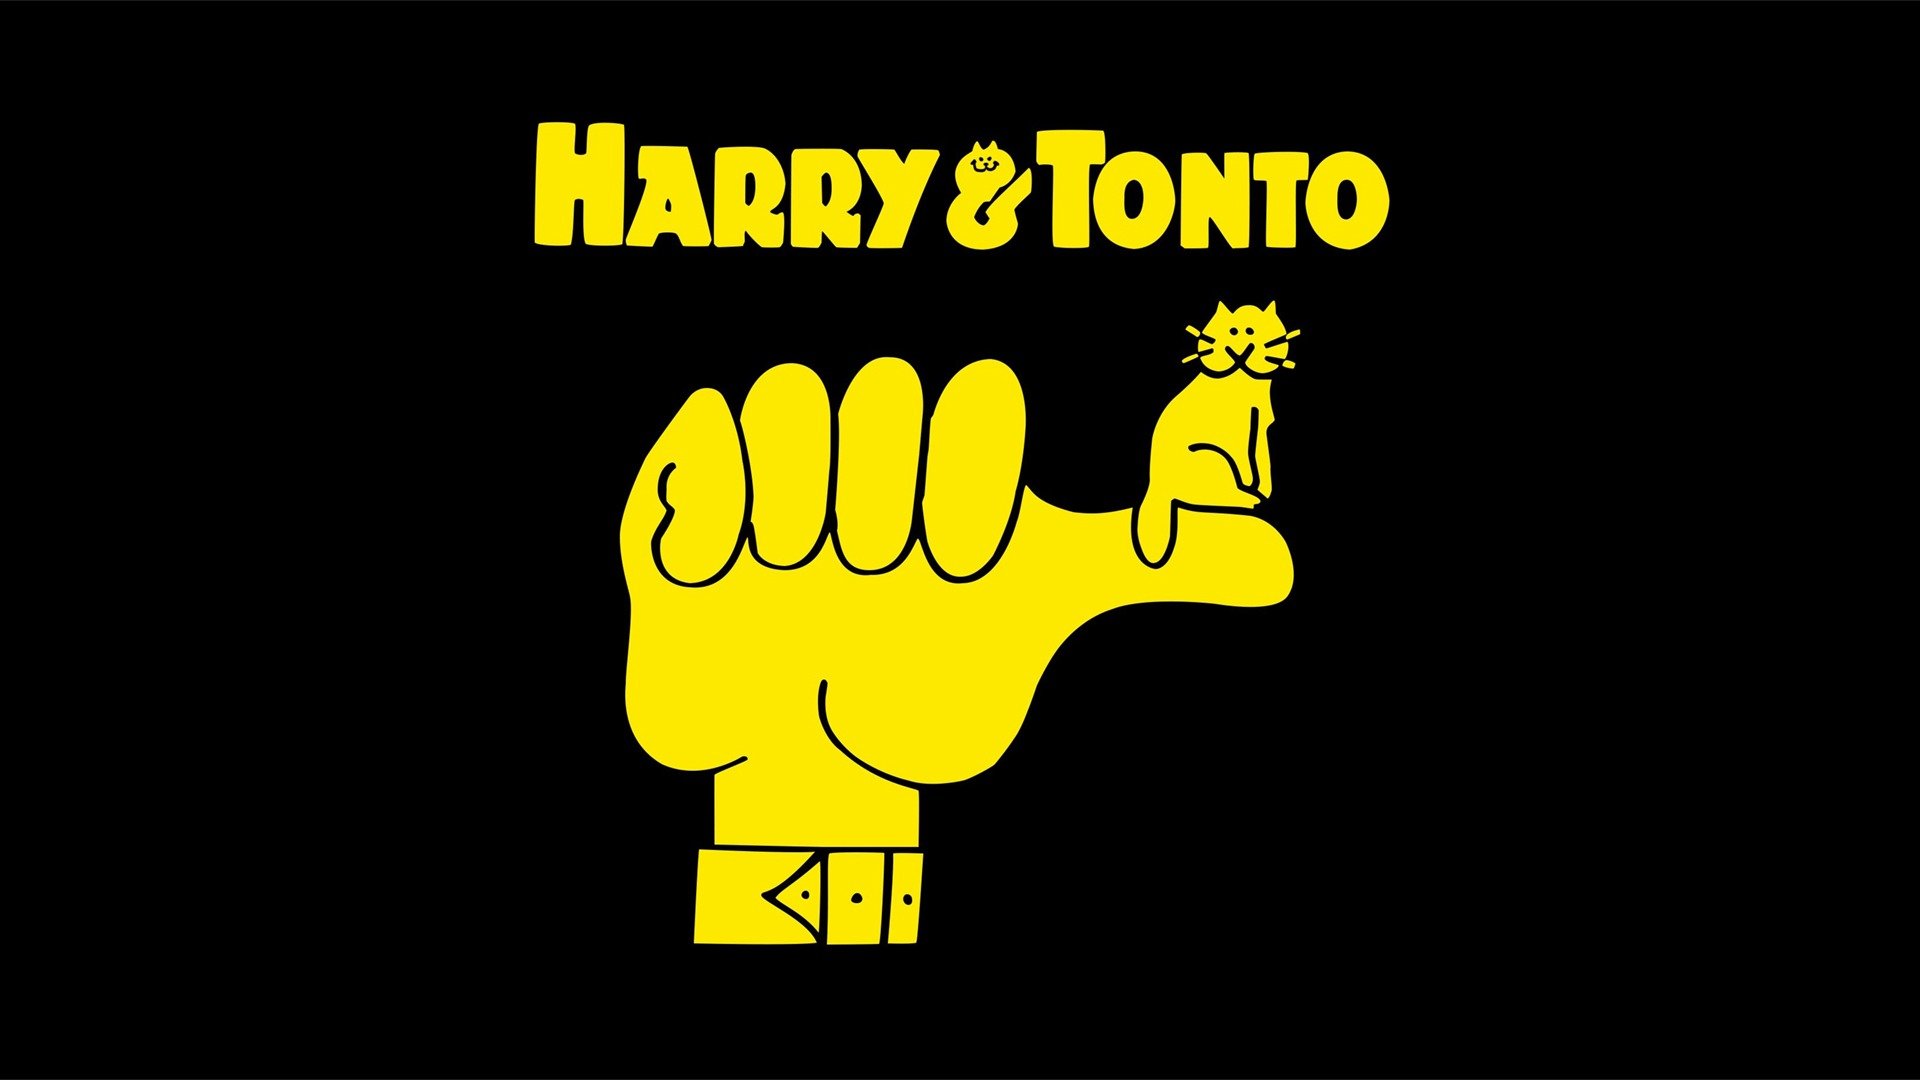 40-facts-about-the-movie-harry-and-tonto